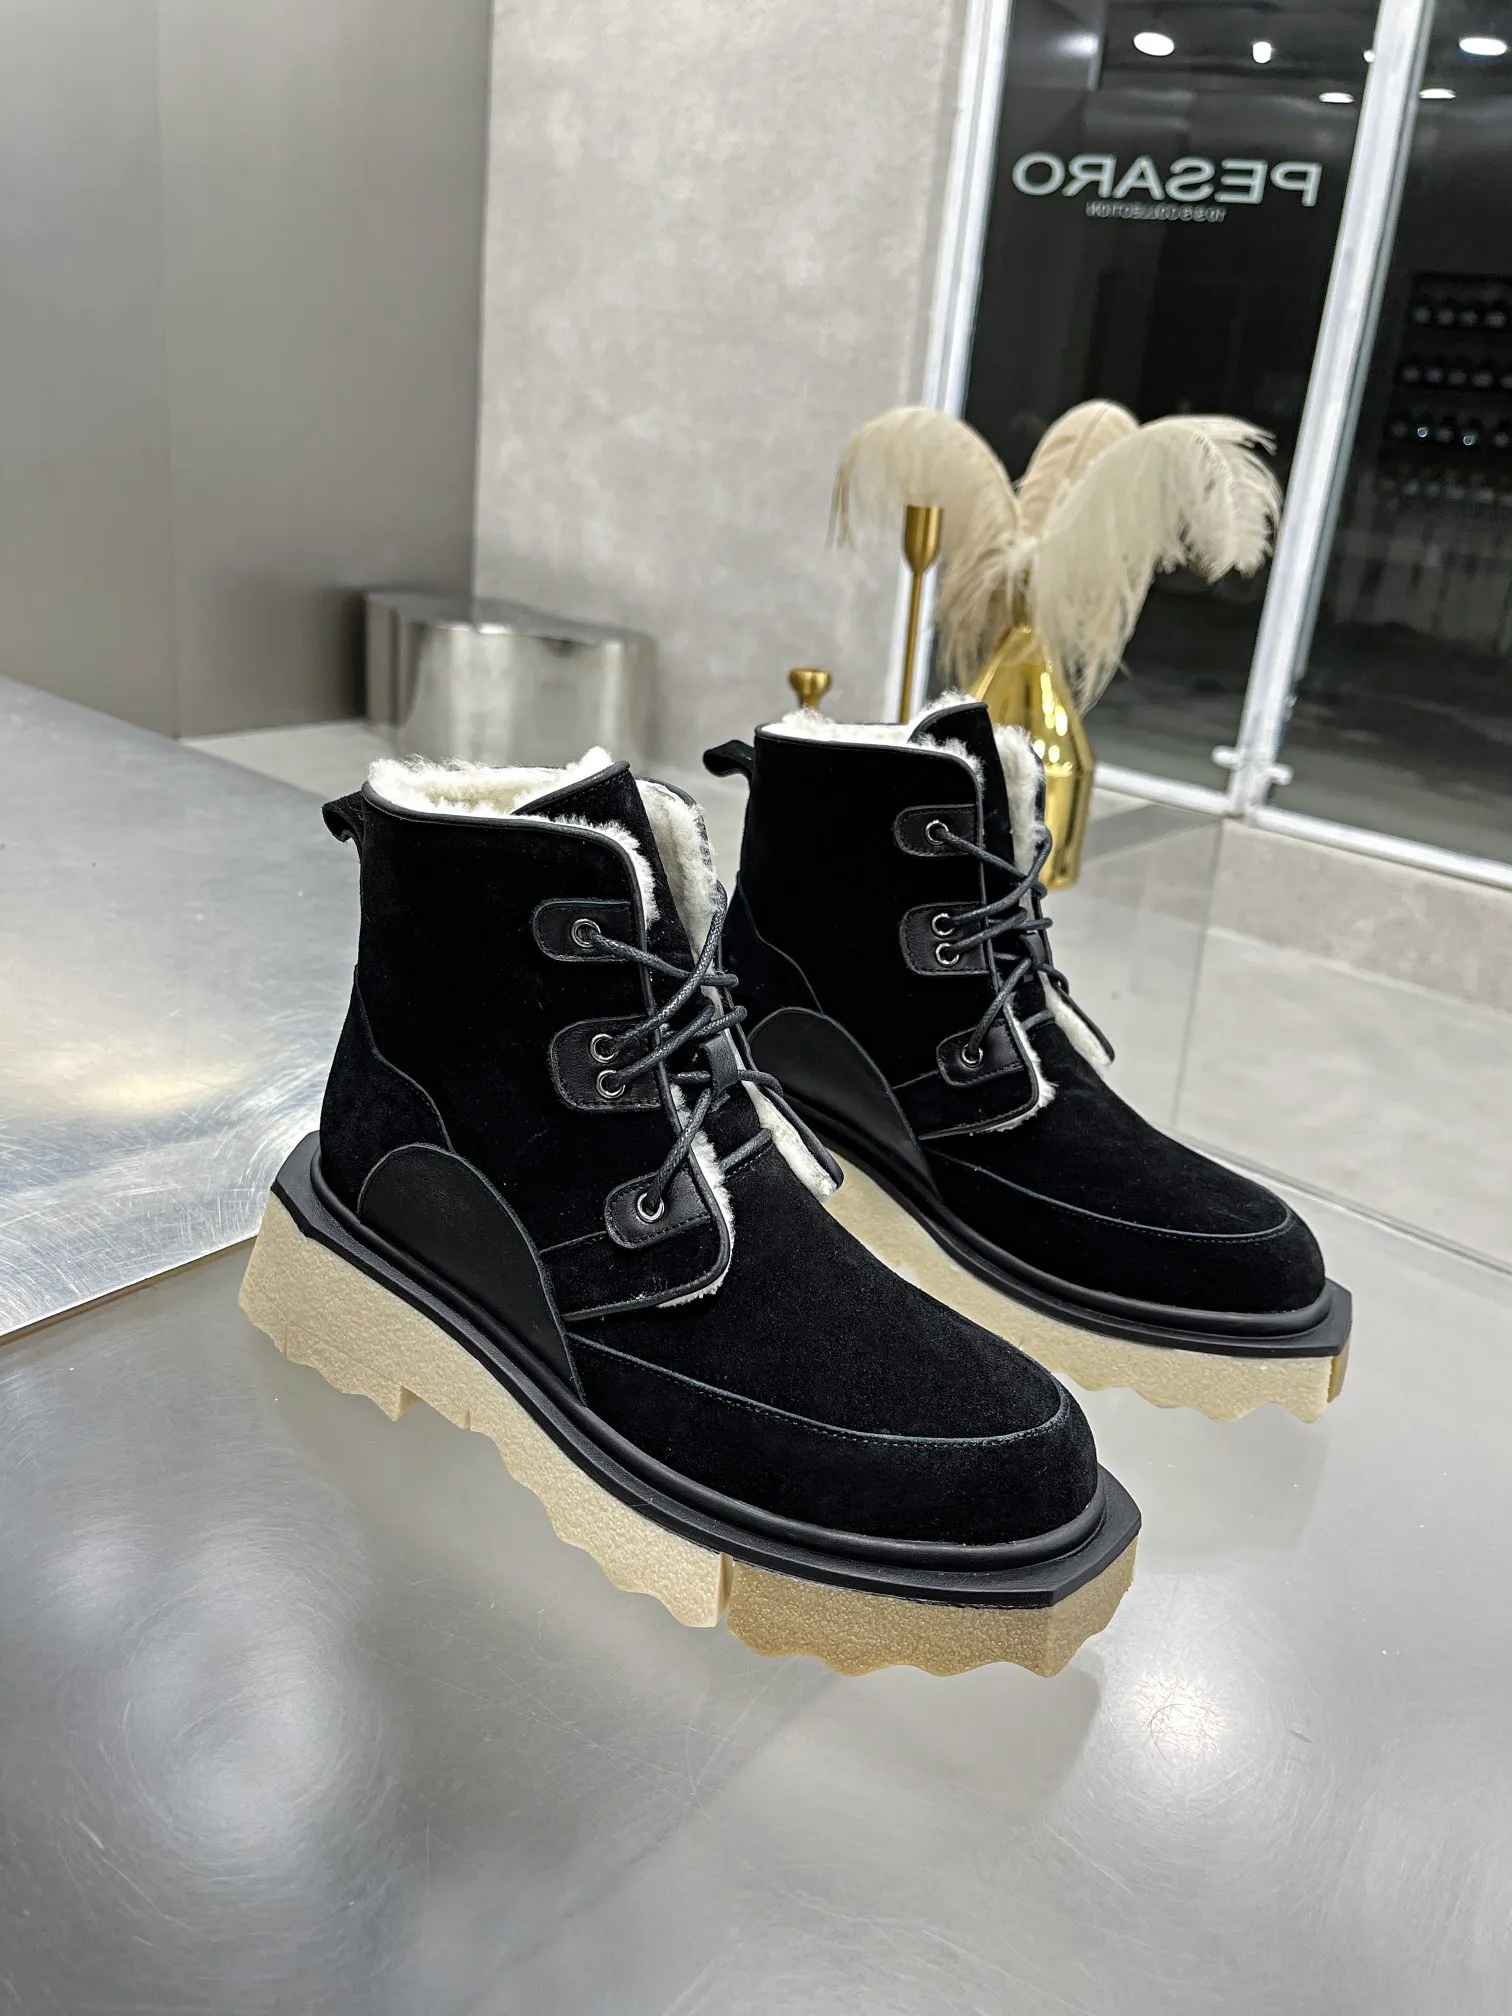 Women Flat Ankle Boots Lace-up Fashion Rubber Sole Booted Top Designer Ladies Winter Snow Boot Shoes Plus Size